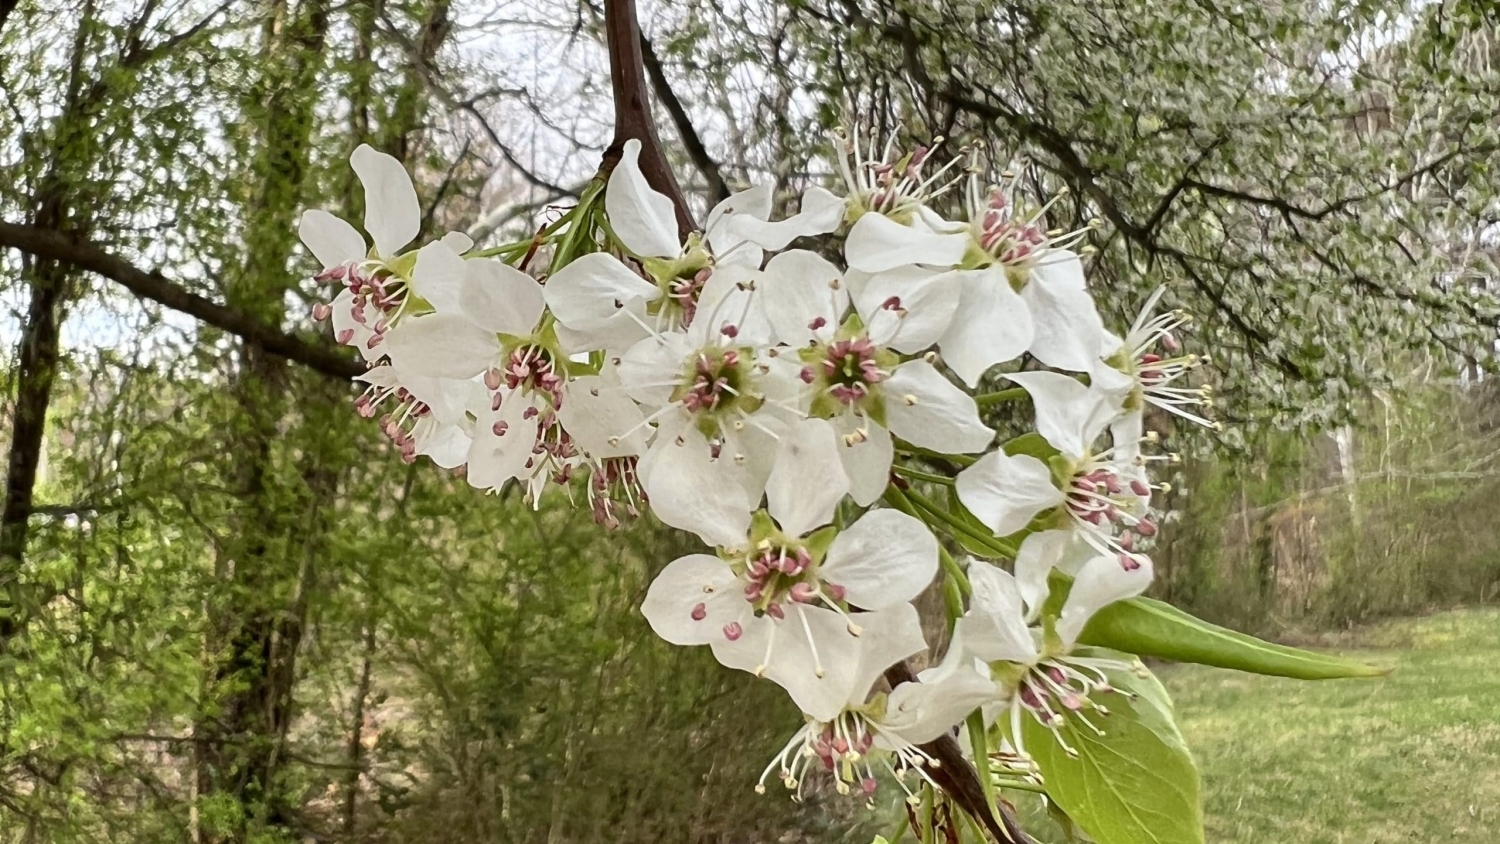 Bradford pear tree in bloom - Bounty Offered on Bradford Pear Trees - Forestry and Environmental Resources NC State University